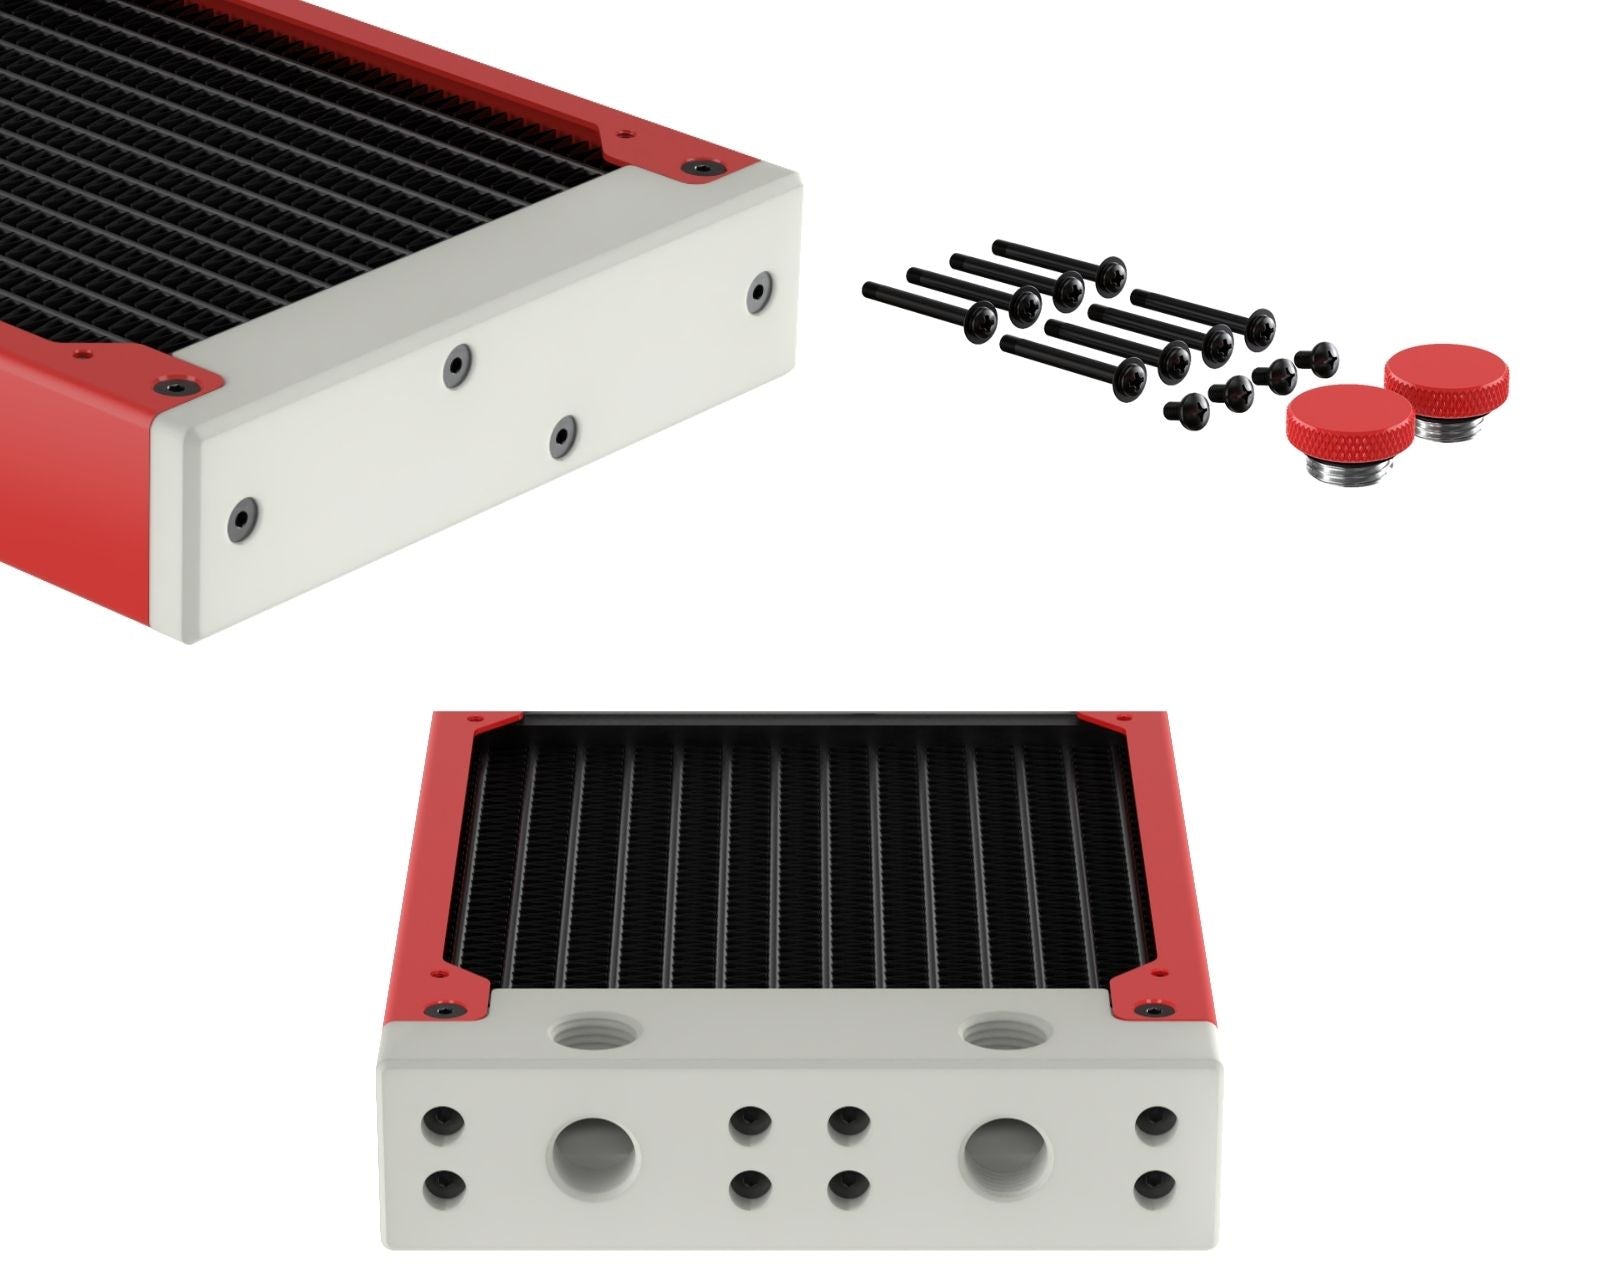 PrimoChill 240SL (30mm) EXIMO Modular Radiator, White POM, 2x120mm, Dual Fan (R-SL-W24) Available in 20+ Colors, Assembled in USA and Custom Watercooling Loop Ready - Razor Red